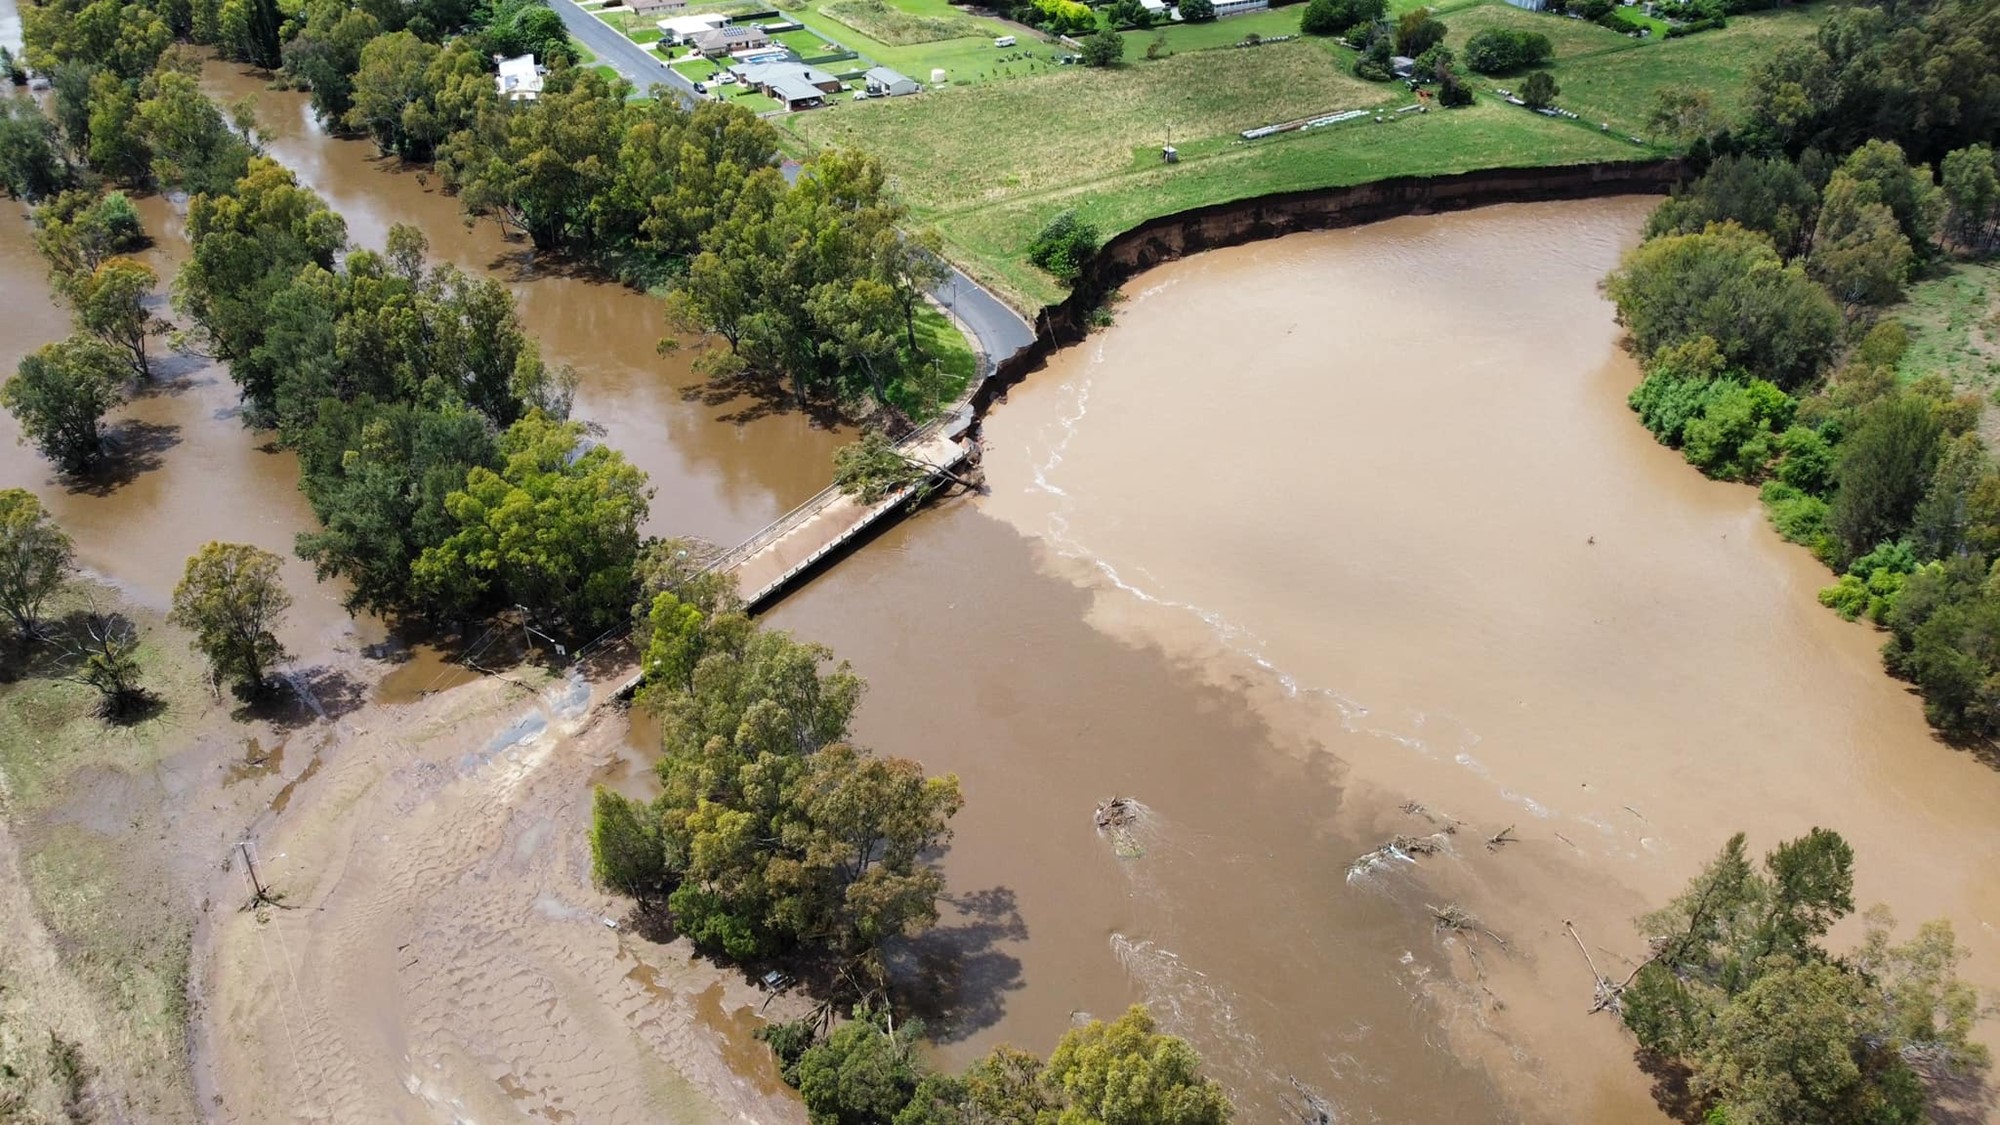 Photo shows an aerial view of a flooded road.